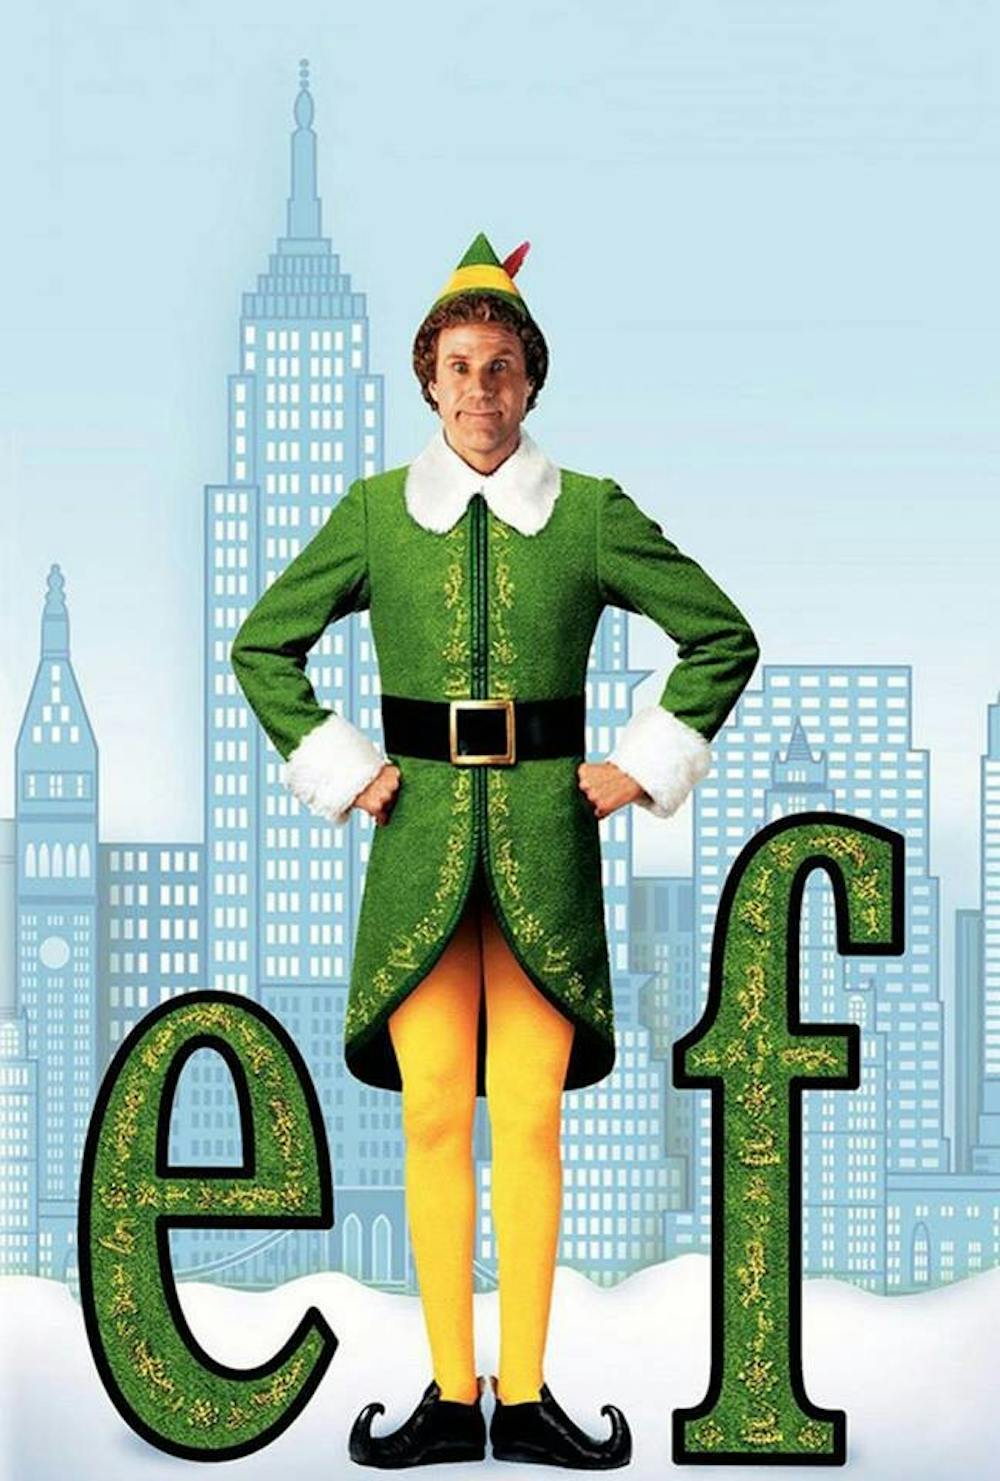 <p>Elf has earned its spot as one of the most memorable Christmas movies to watch during the holiday season. Will Ferrell’s comedic portrayal as one of Santa’s elves lost in NYC puts a fun twist on classic holiday films.</p>